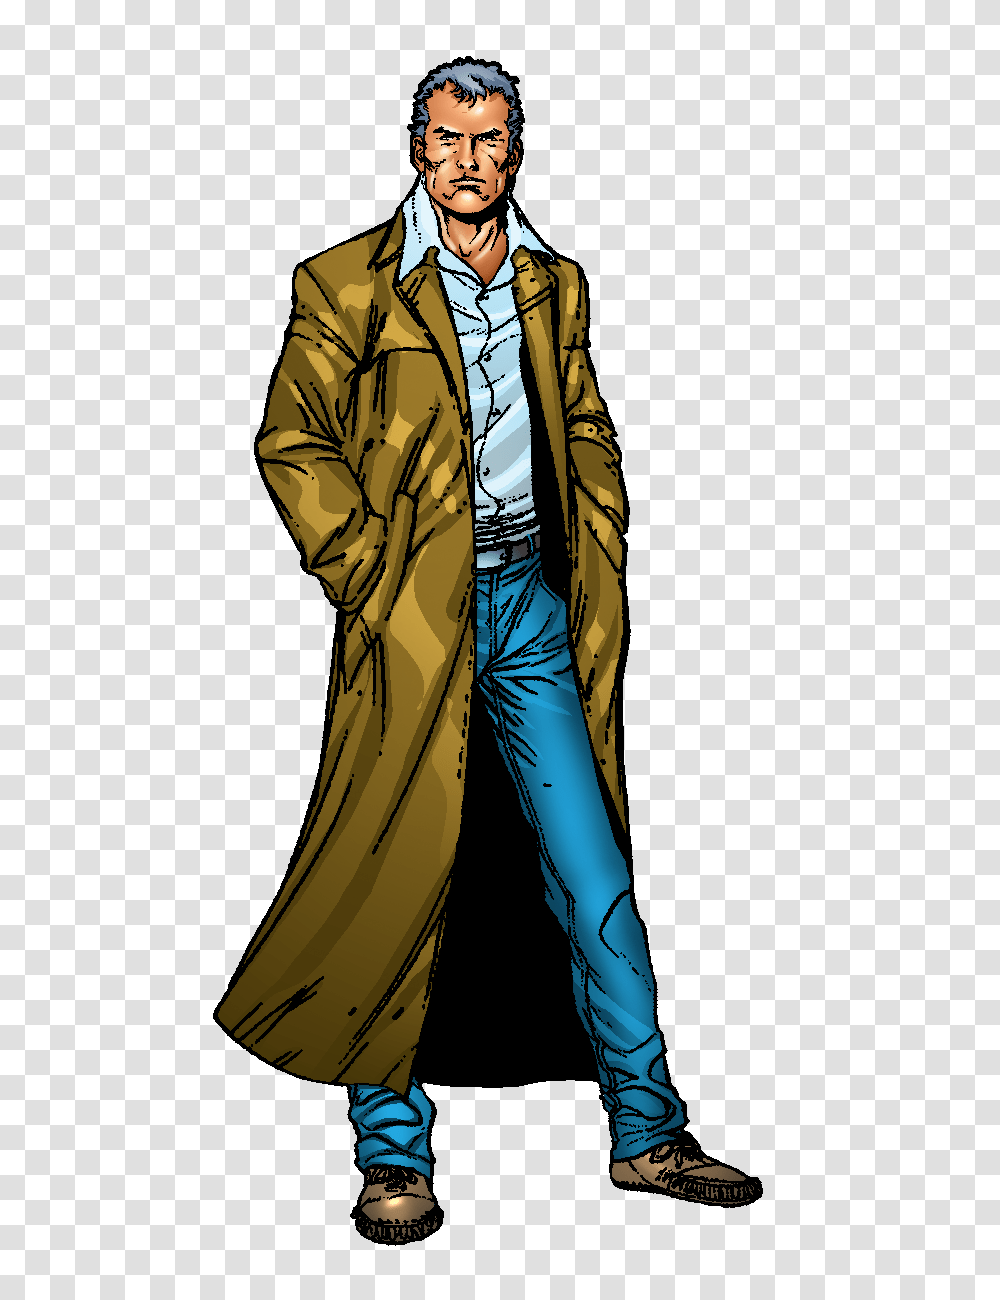 Edge The Hitman With Shattered Memories Who Is Always On The Run, Sleeve, Coat, Person Transparent Png